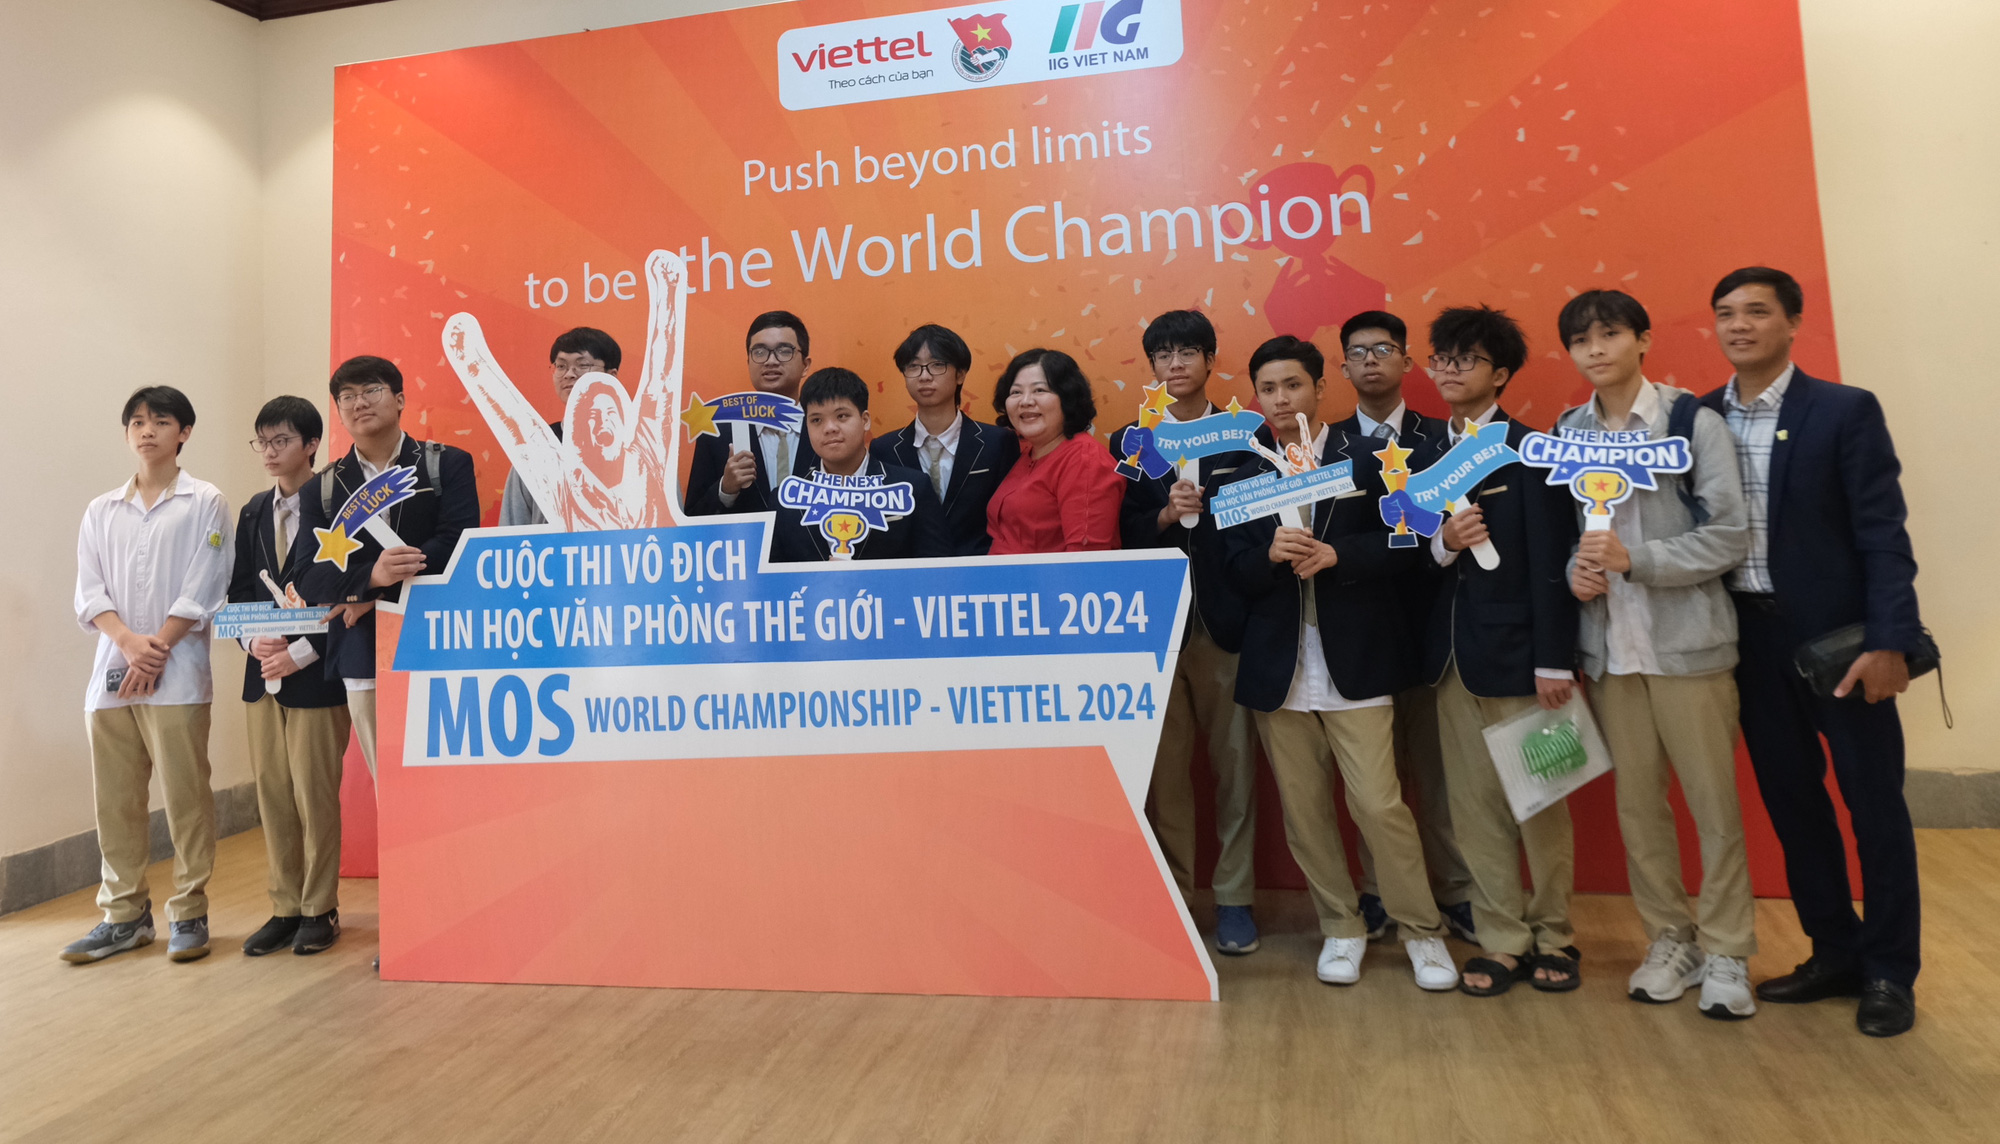 Over 2,000 Vietnamese join Microsoft Office World Championship qualifiers